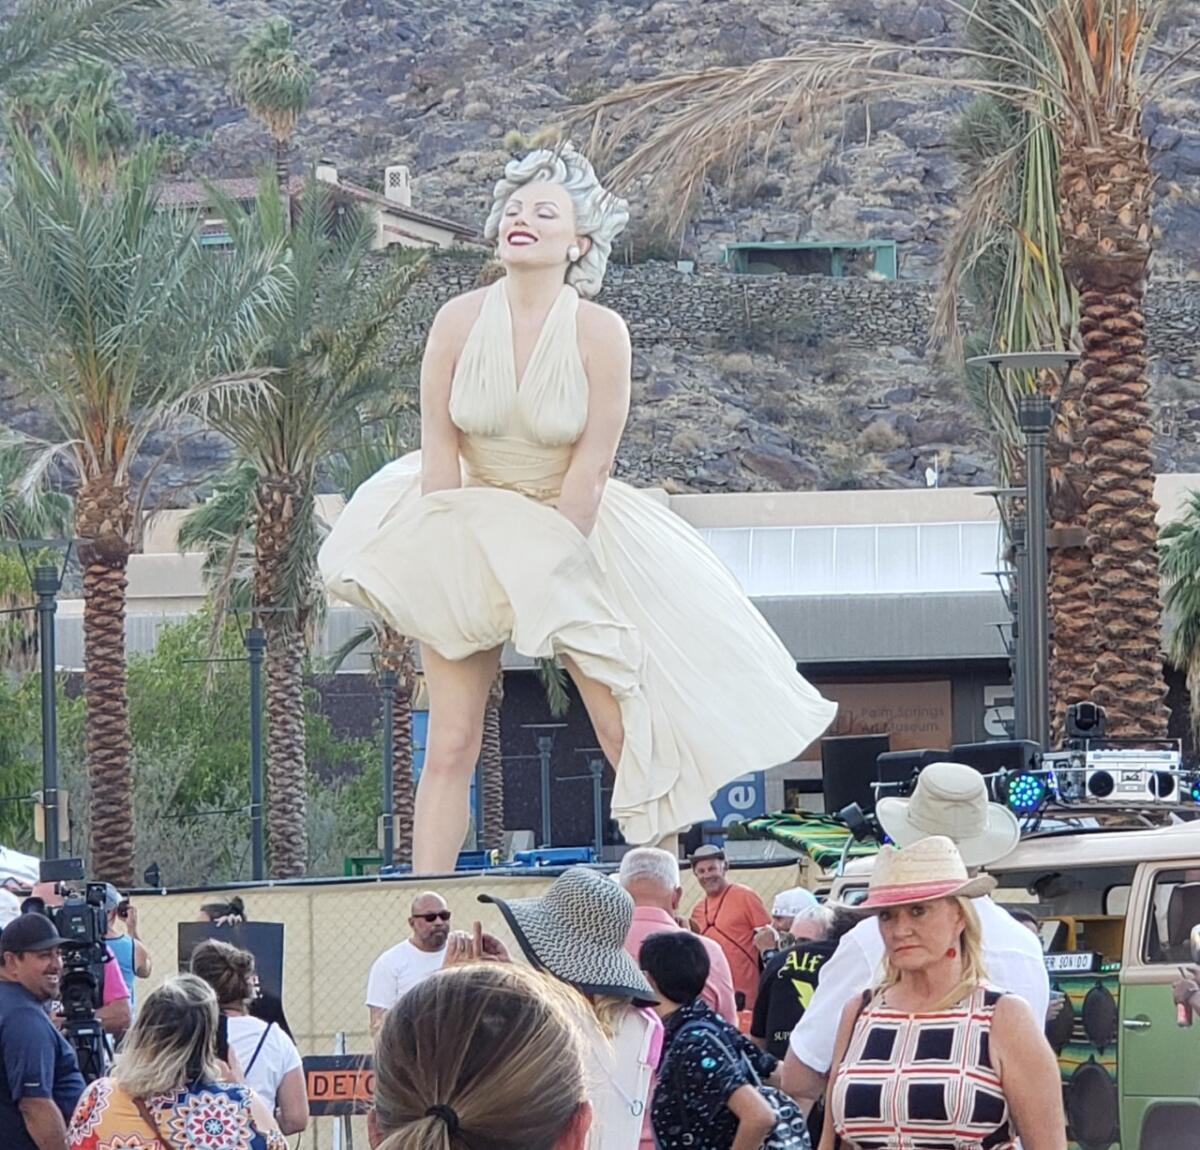 The "Forever Marilyn" statue with mountains behind it and people milling in the foreground